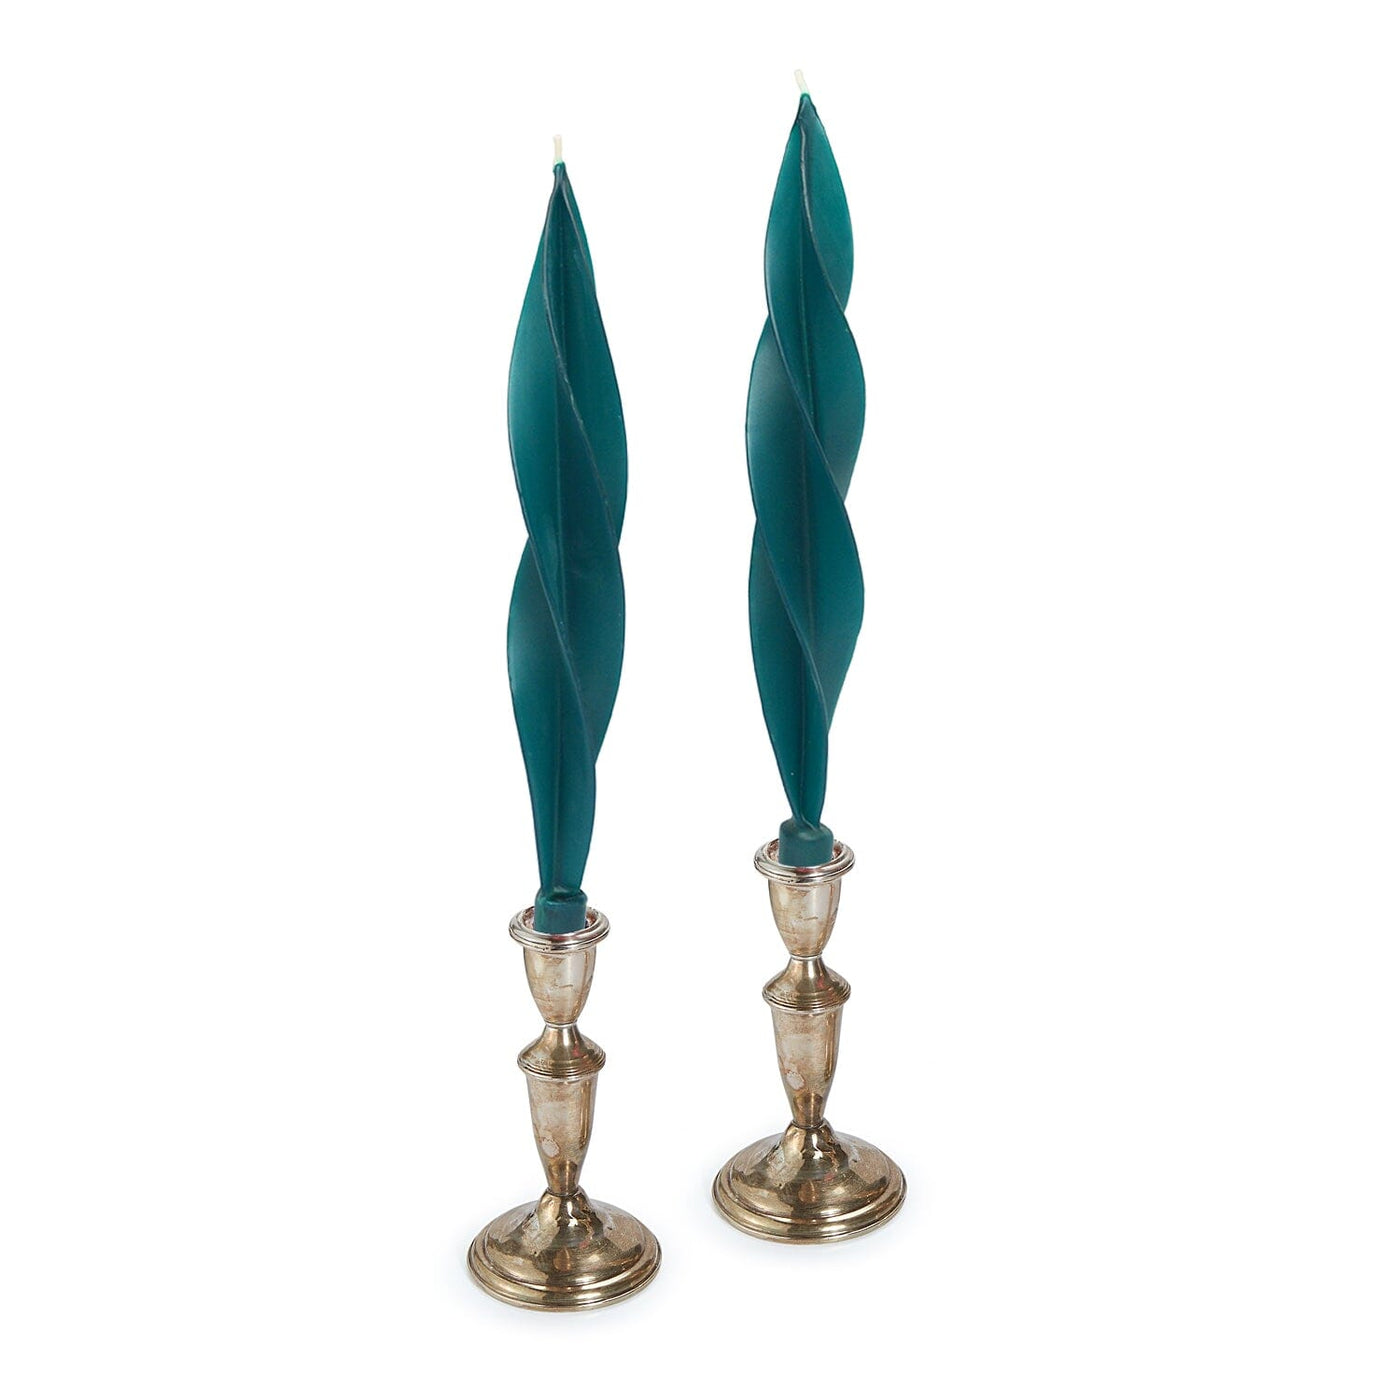 Teal Feather Candles (2) Bamboo Chefanie 